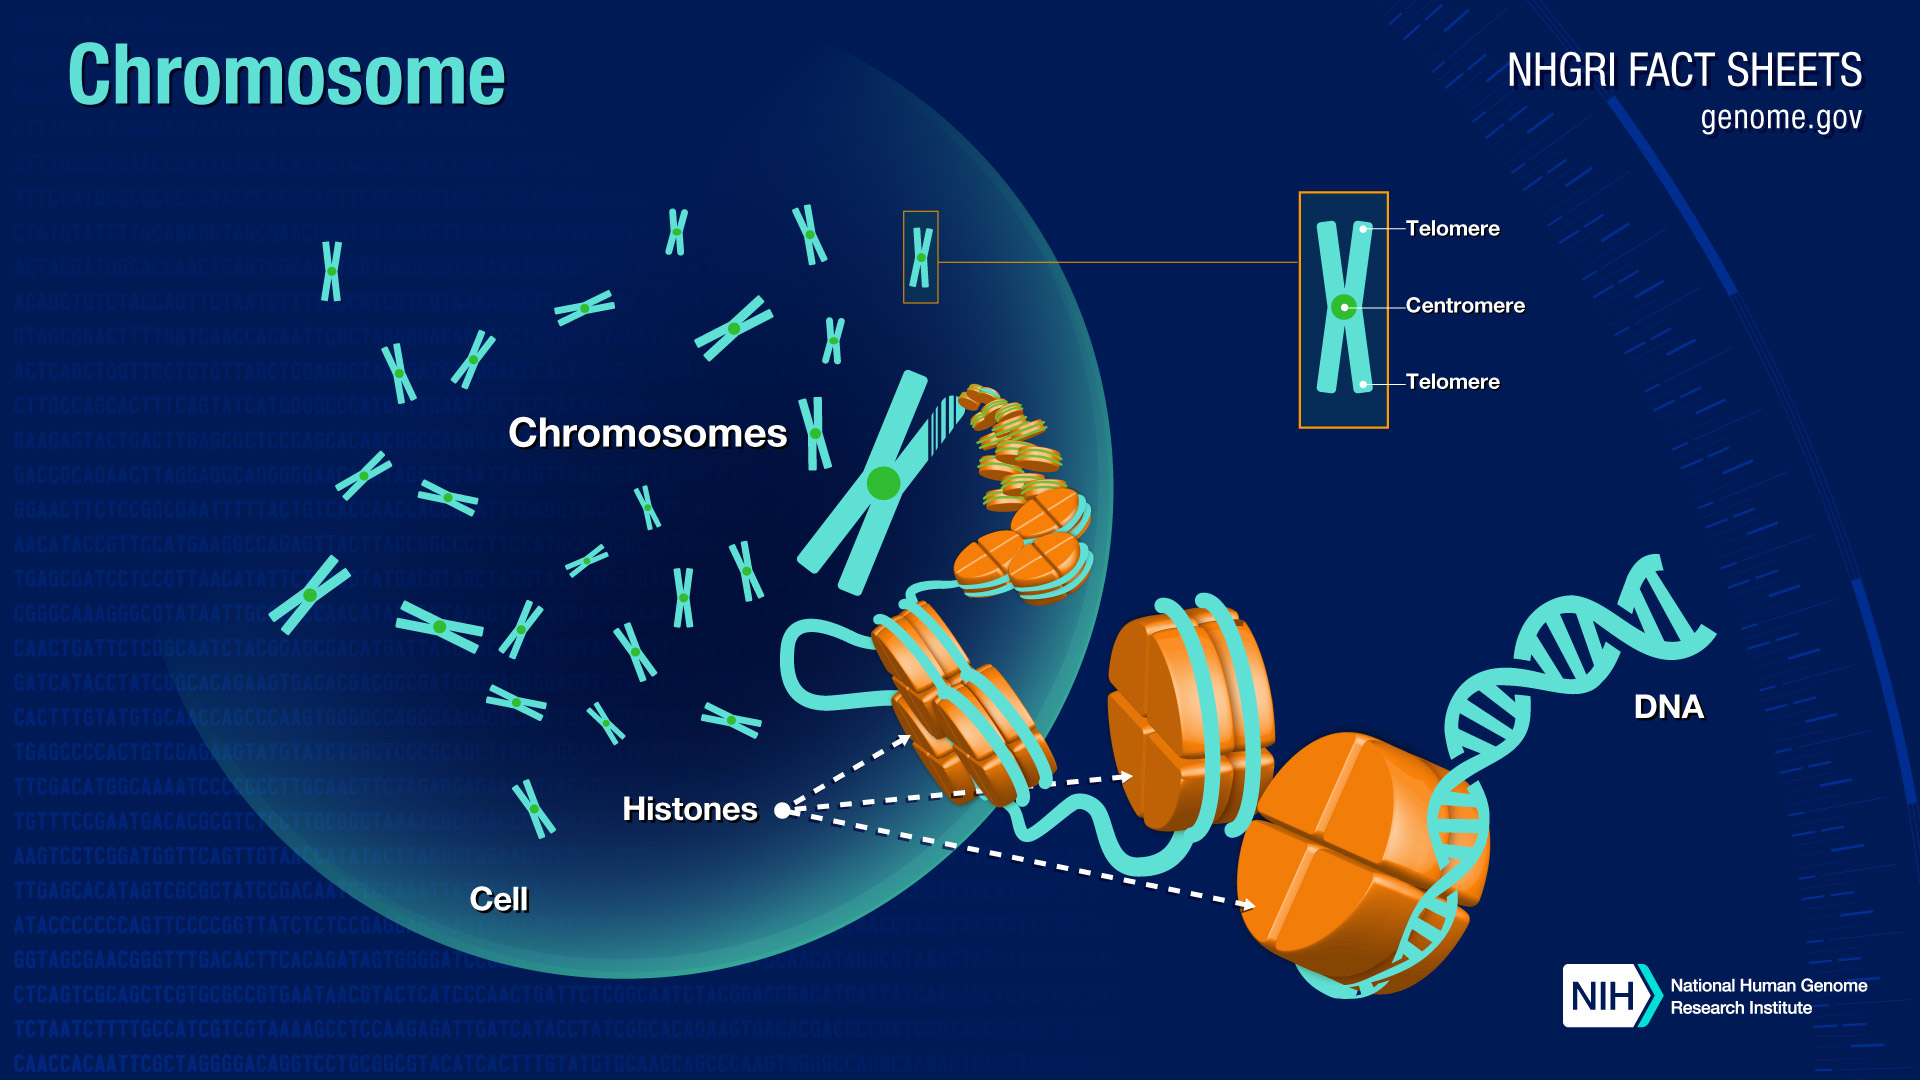 chromosomes in an animal cell